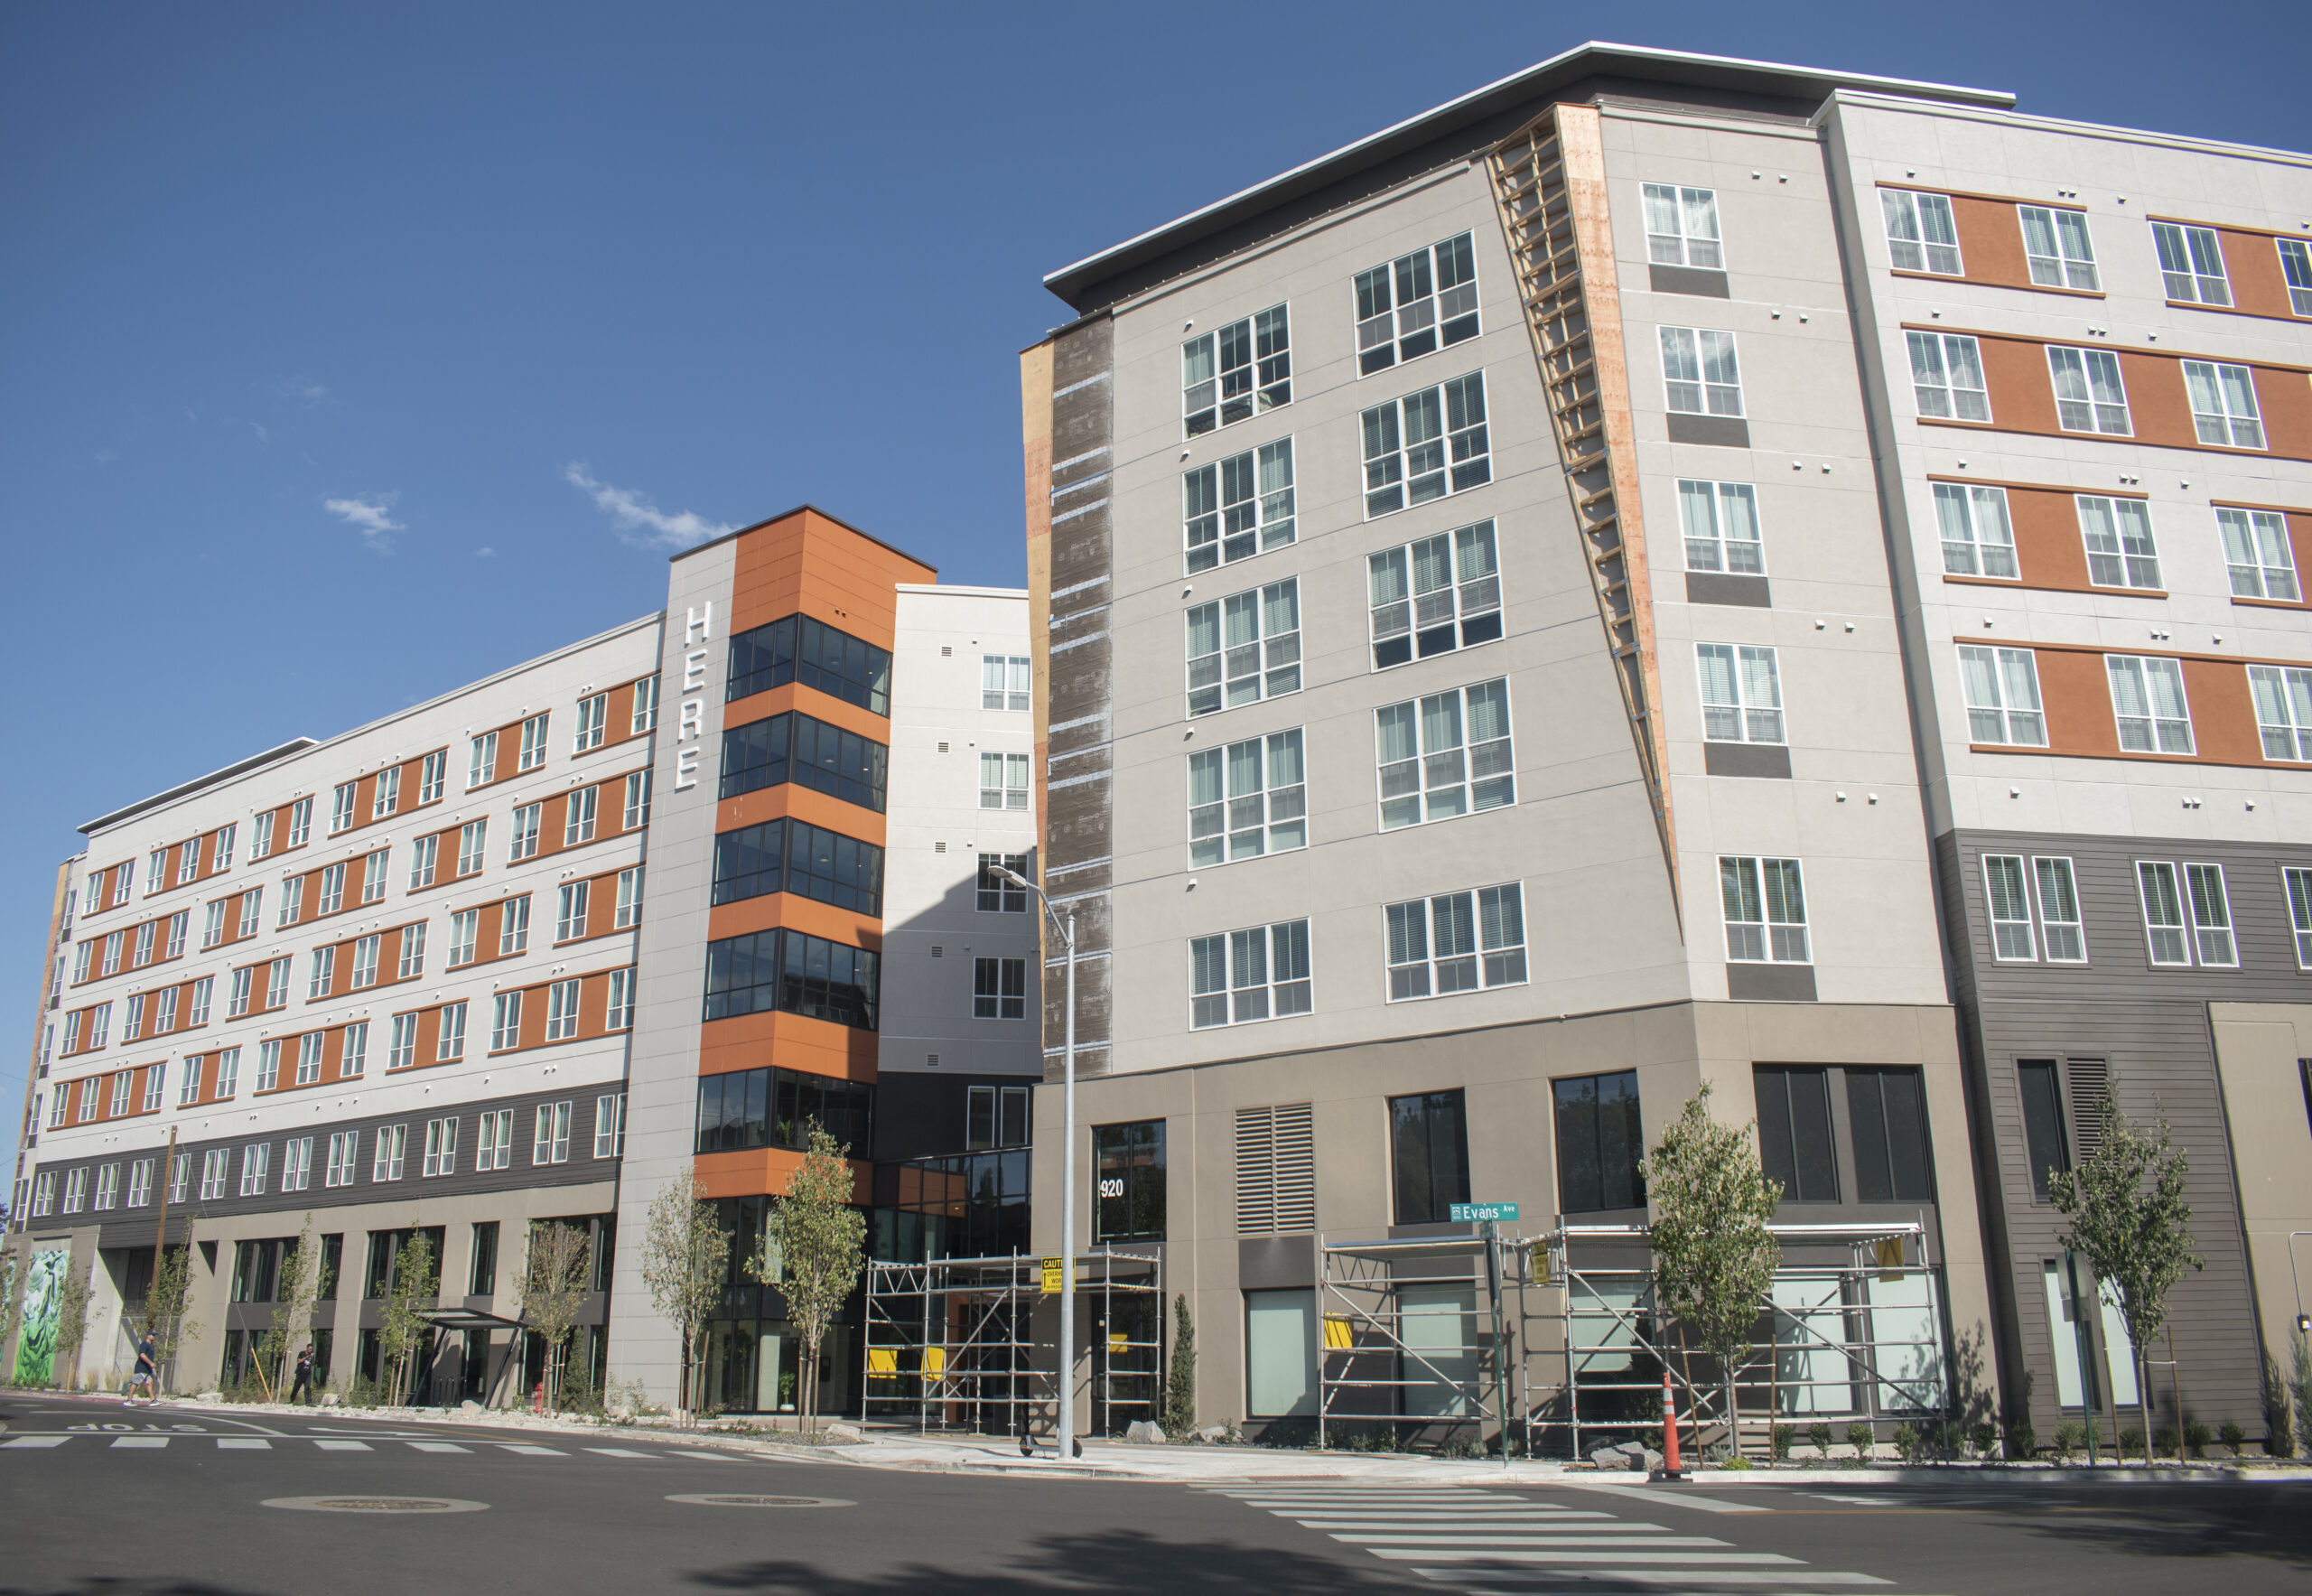 Delays at HERE Reno Affect Students, Put into Temporary Housing